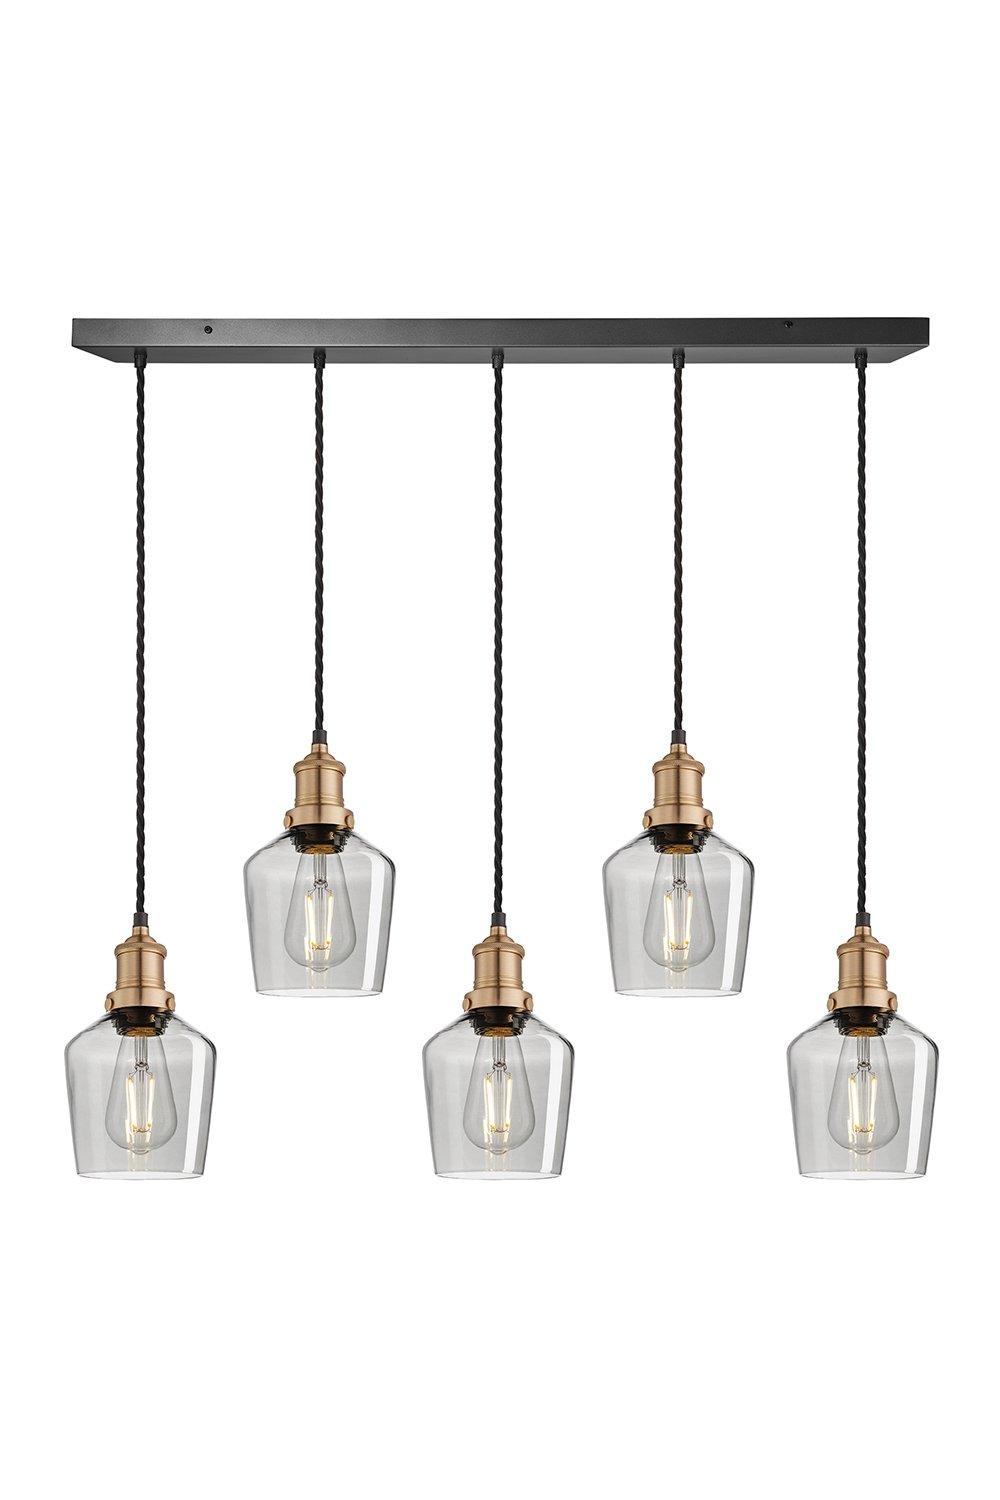 Brooklyn Tinted Glass Schoolhouse 5 Wire Cluster Lights, 5.5 inch, Smoke Grey, Brass holder